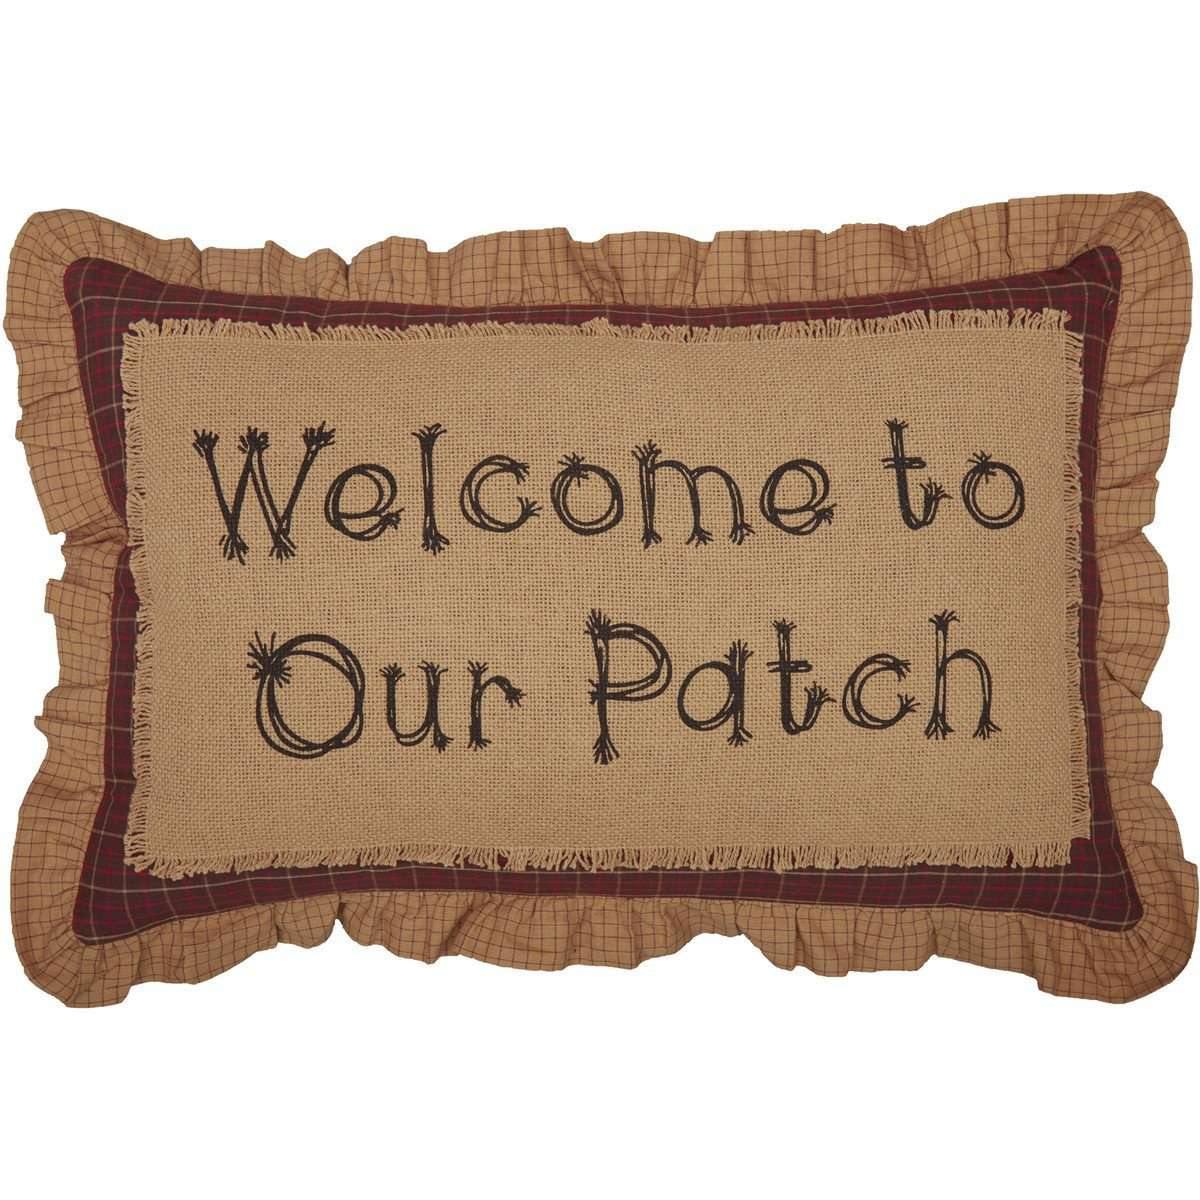 Landon Welcome to Our Patch Pillow 14x22 VHC Brands front